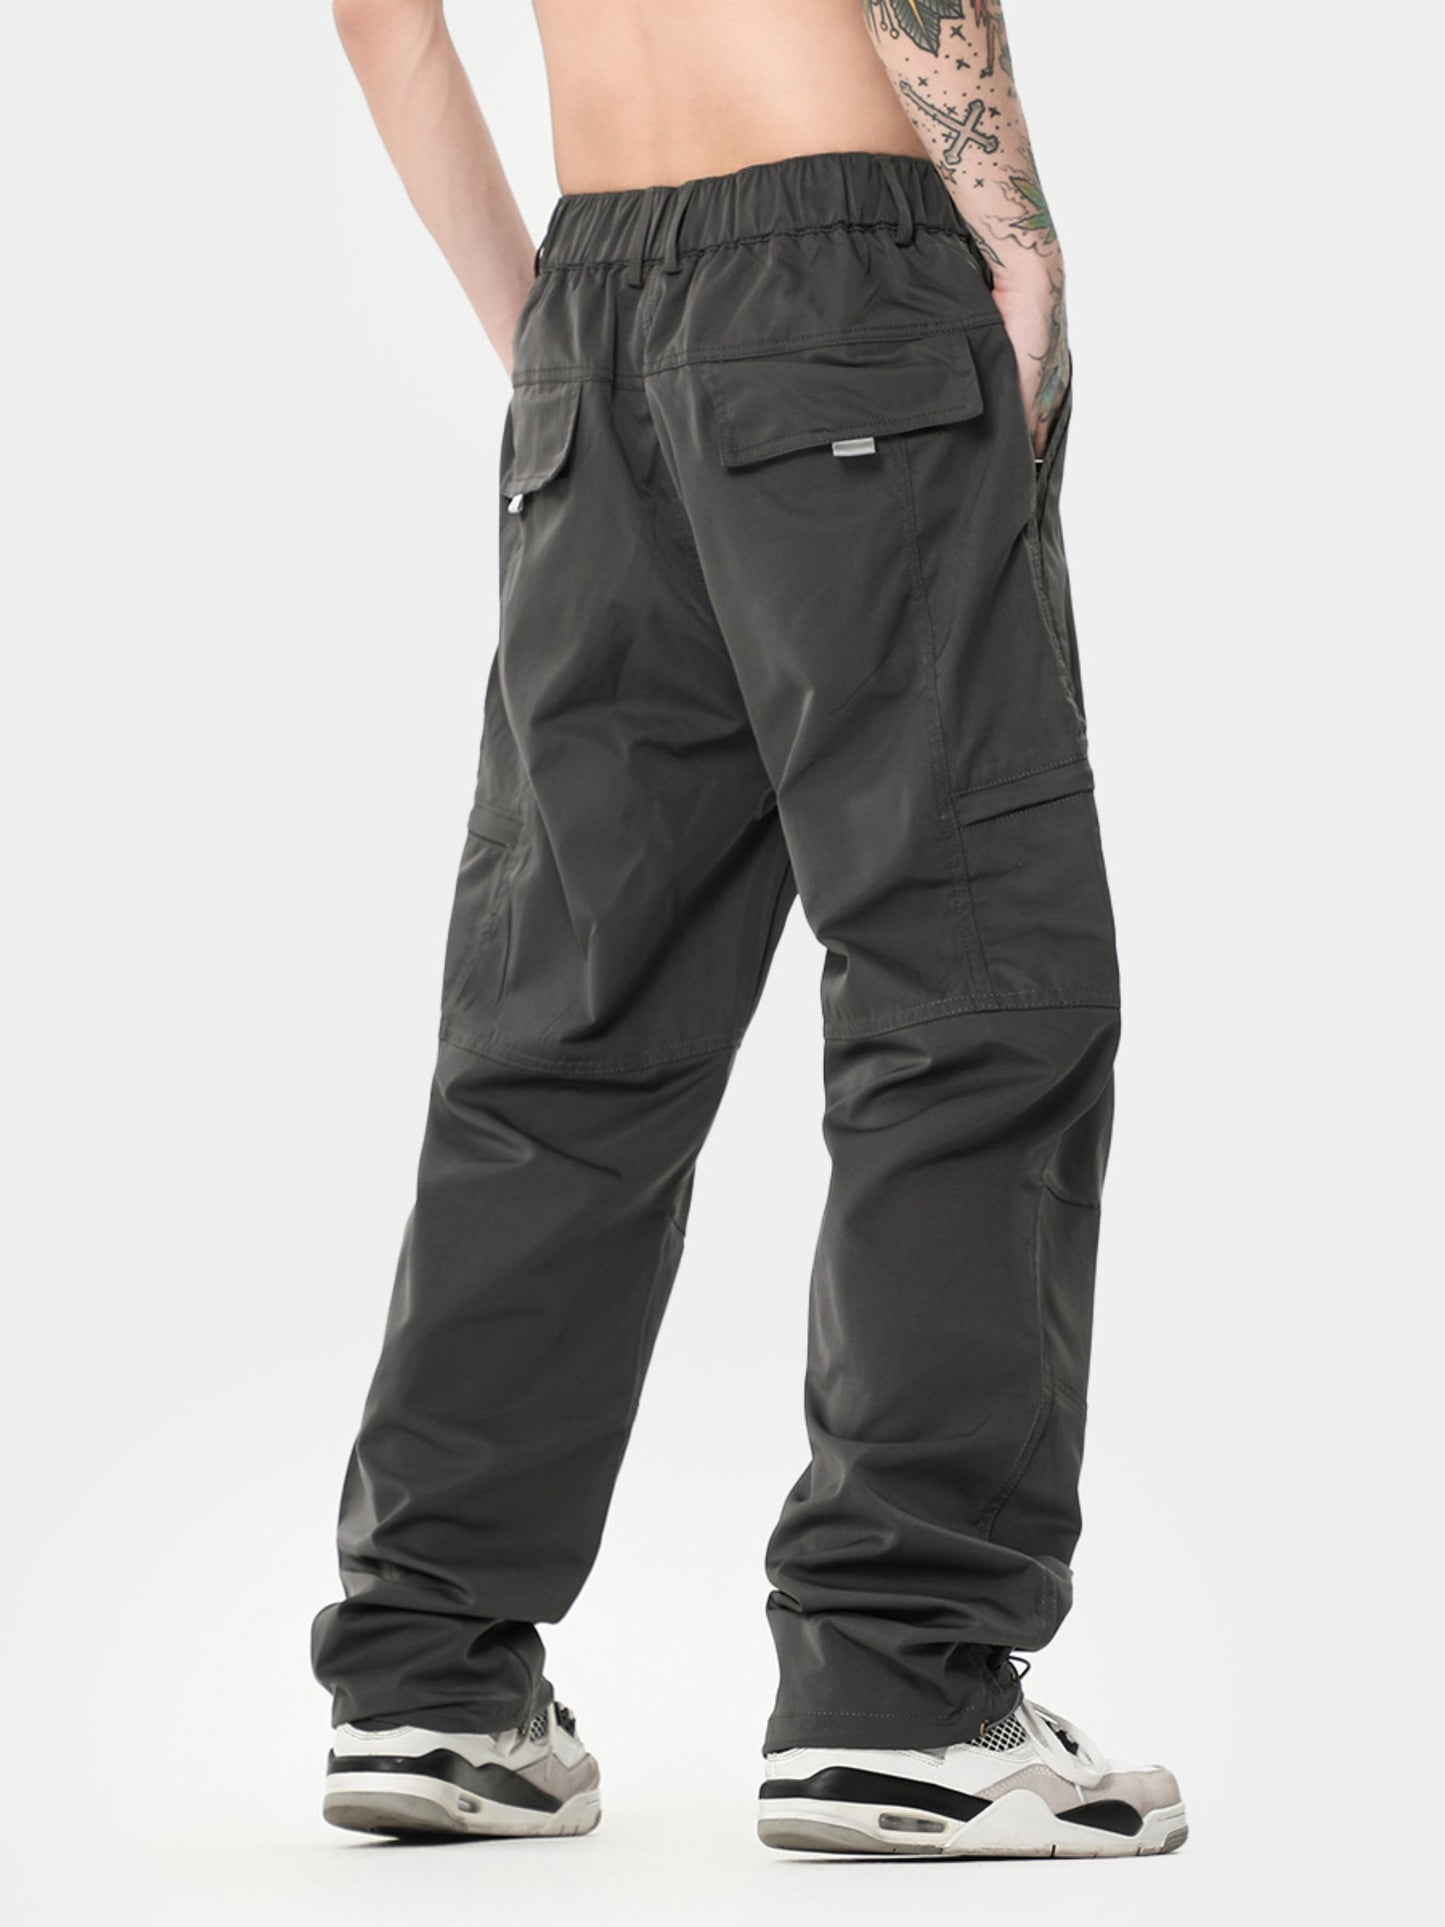 Unisex Straight casual sports cargo pants with leggings